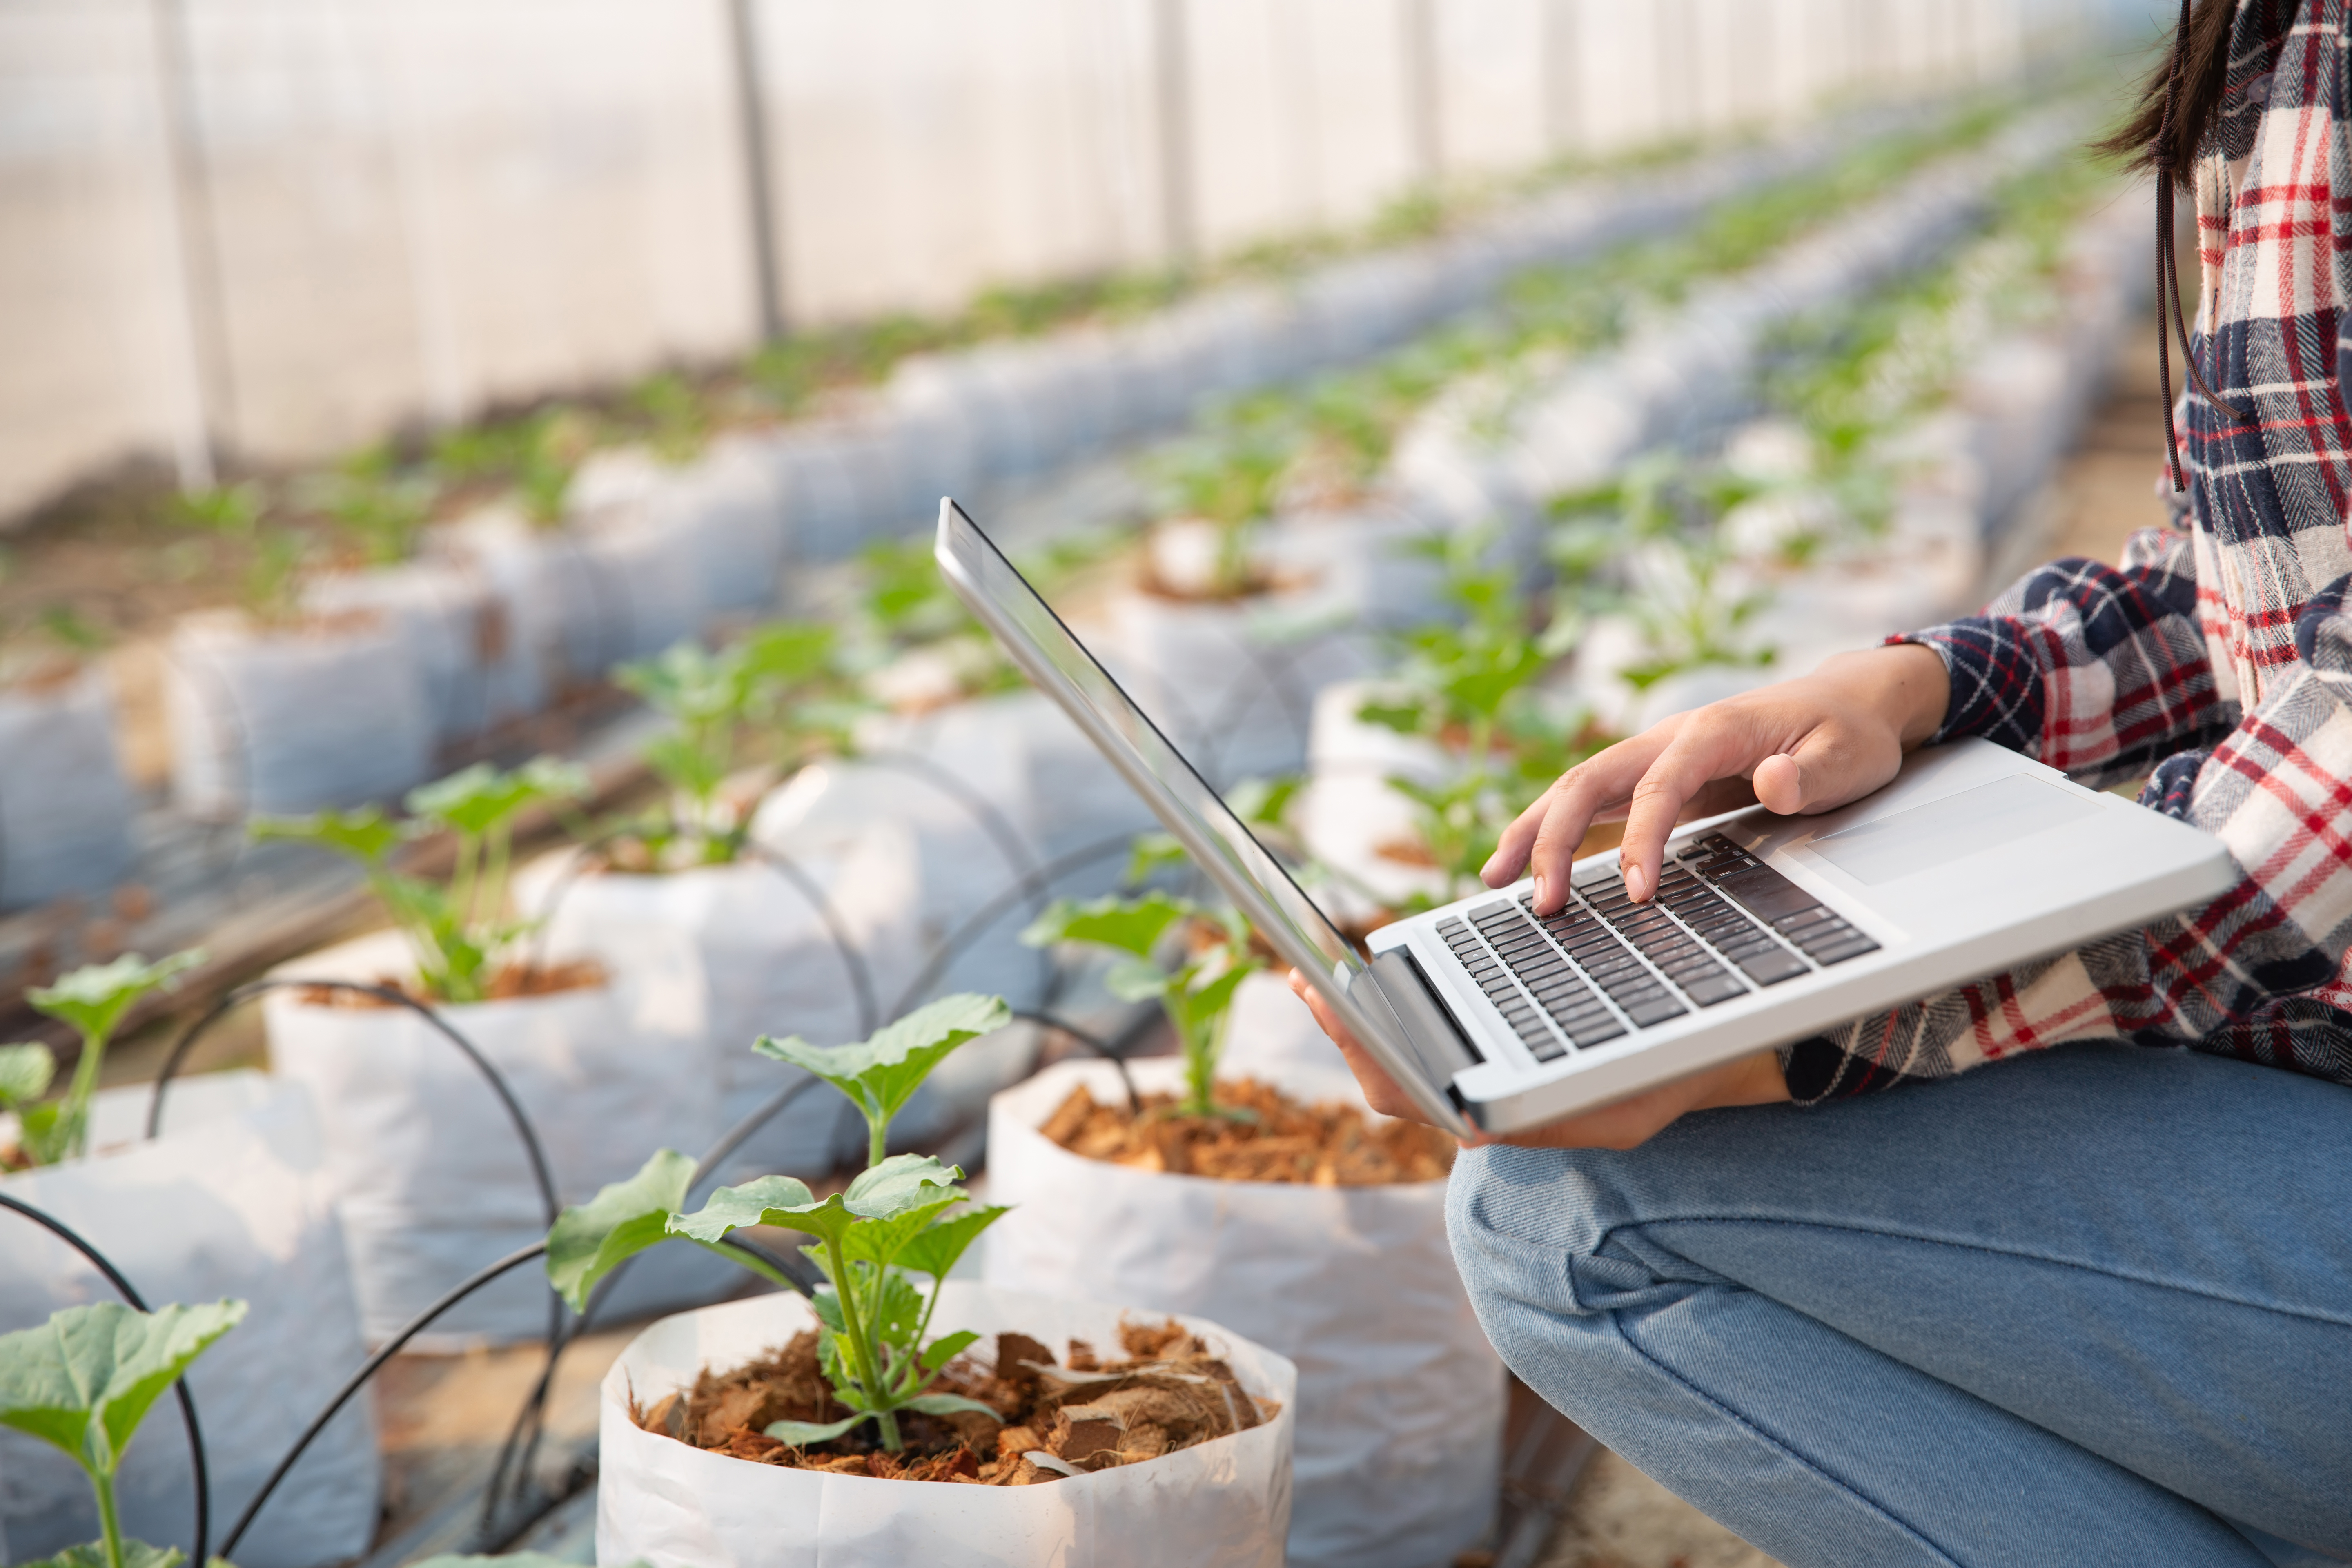 A greenhouse worker surrounded by plants holding a computer